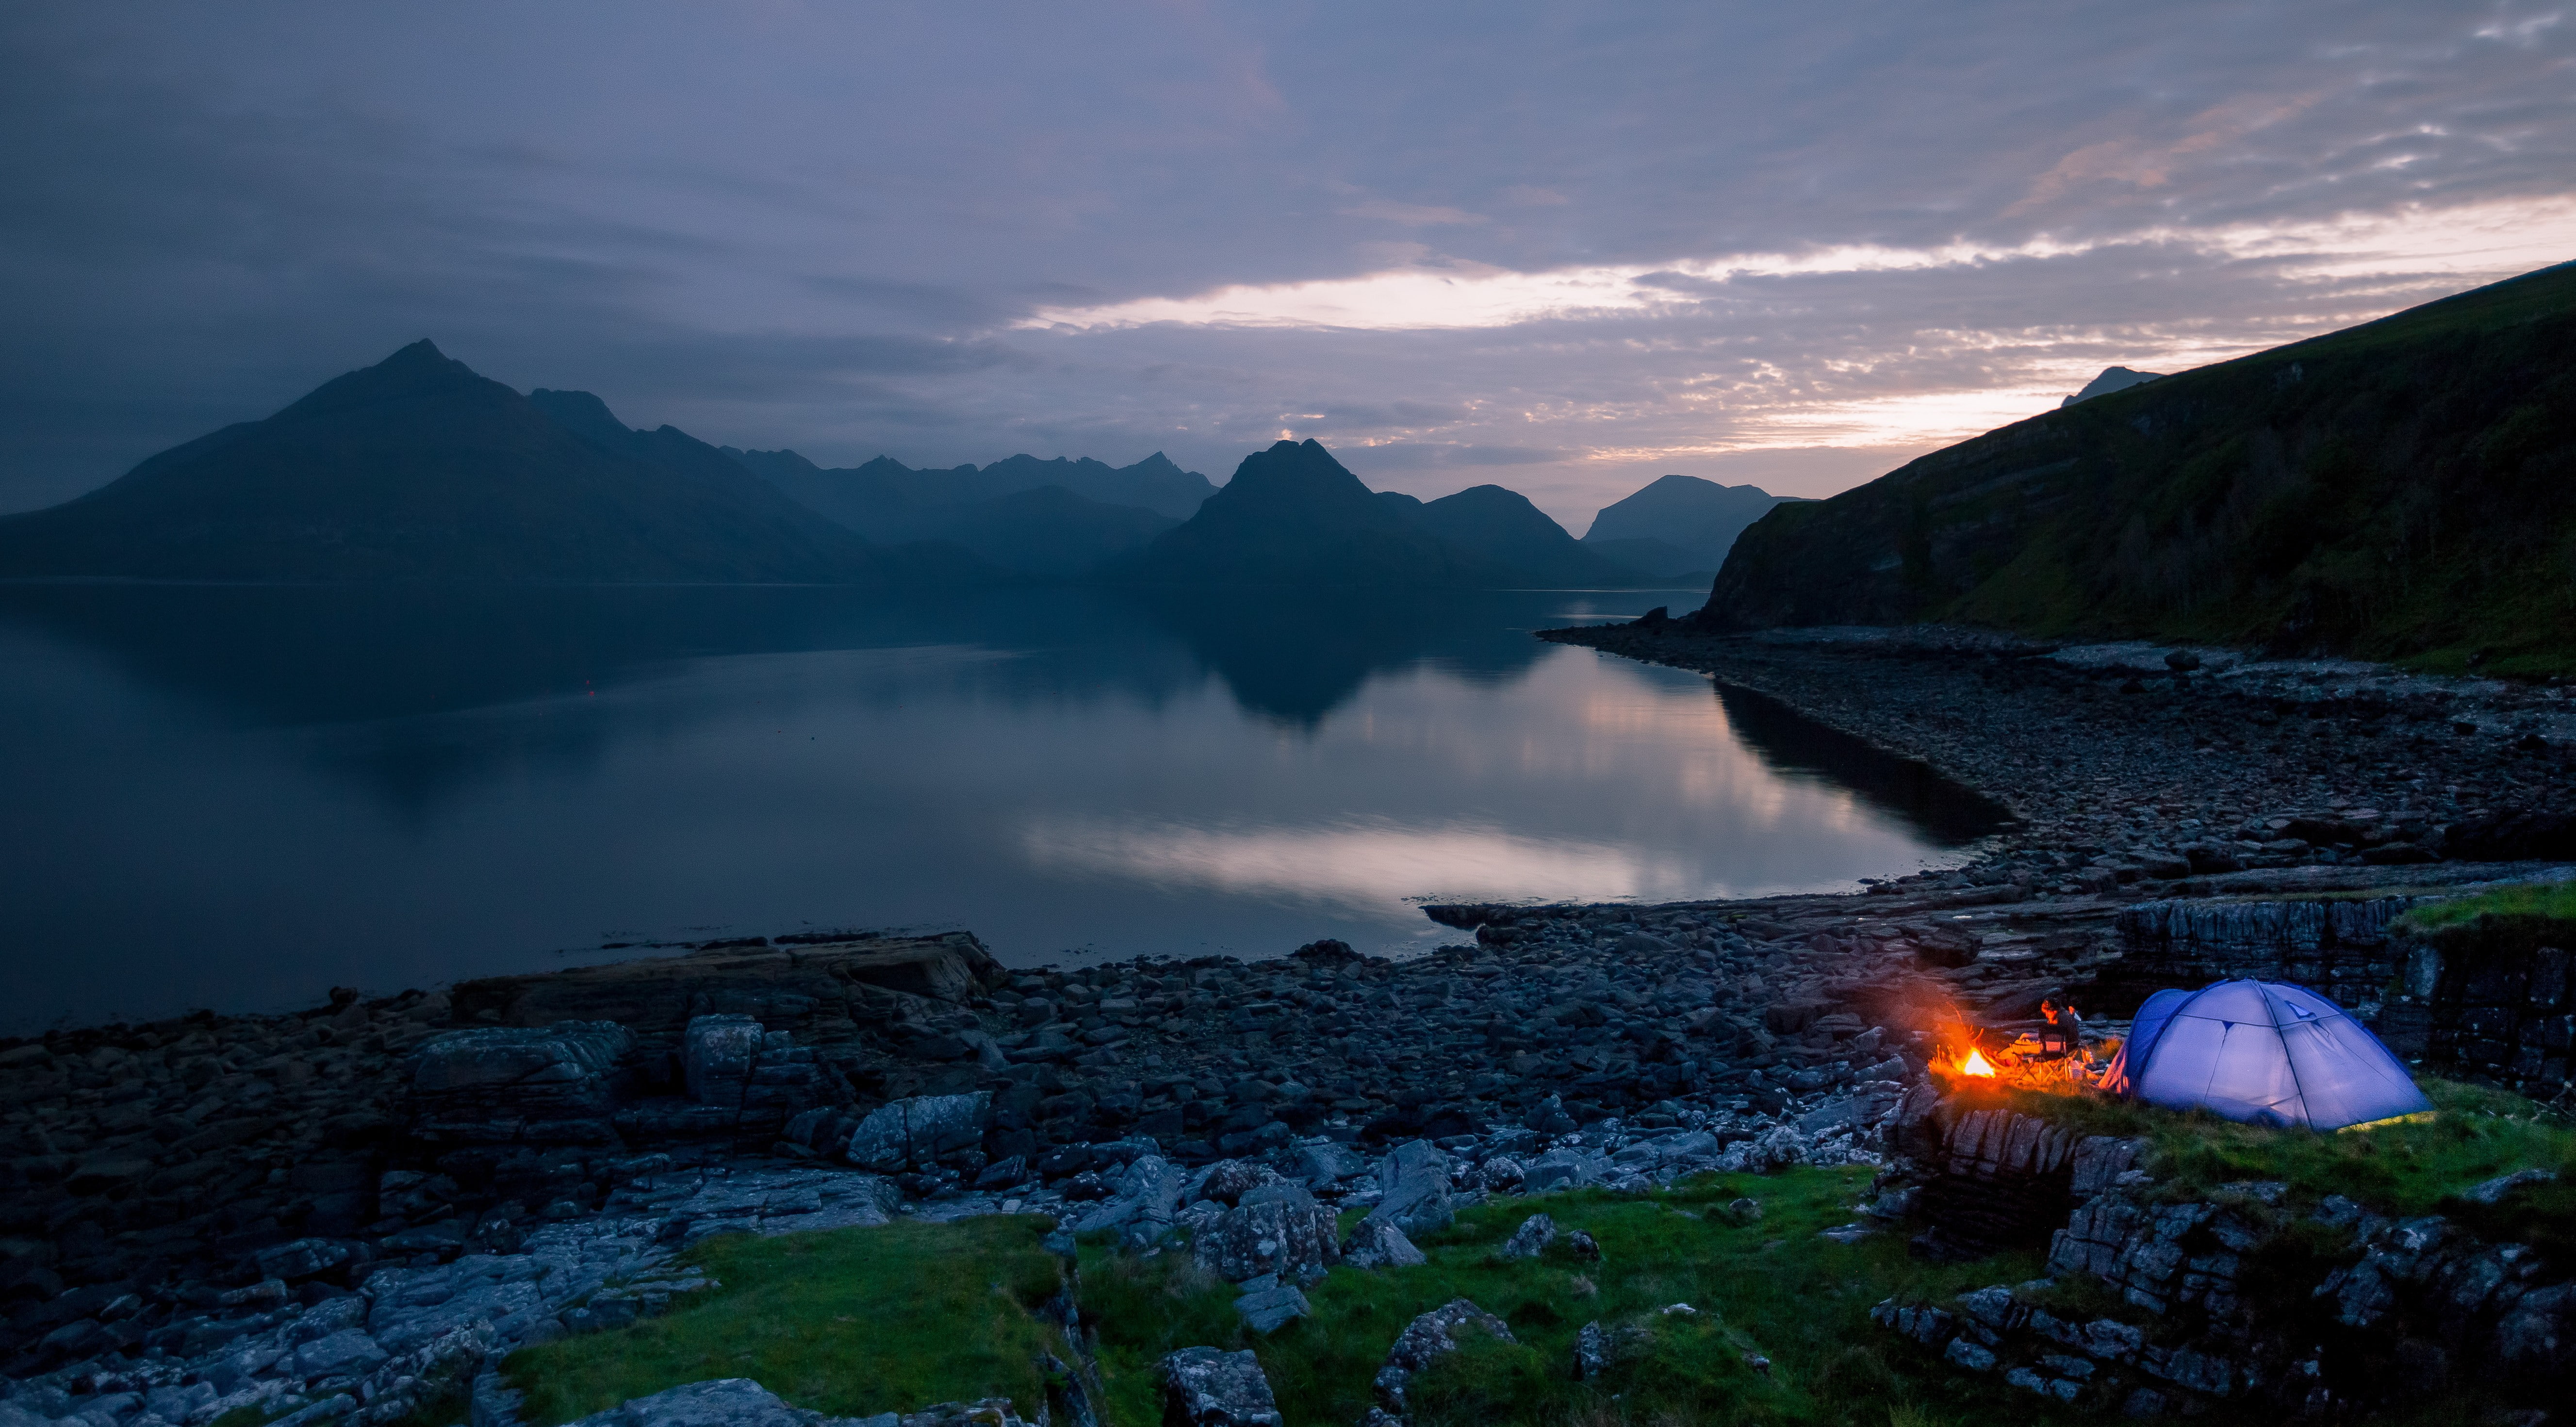 sunset, mountains, camping, nature, fire, campfire, Elgol, rocks